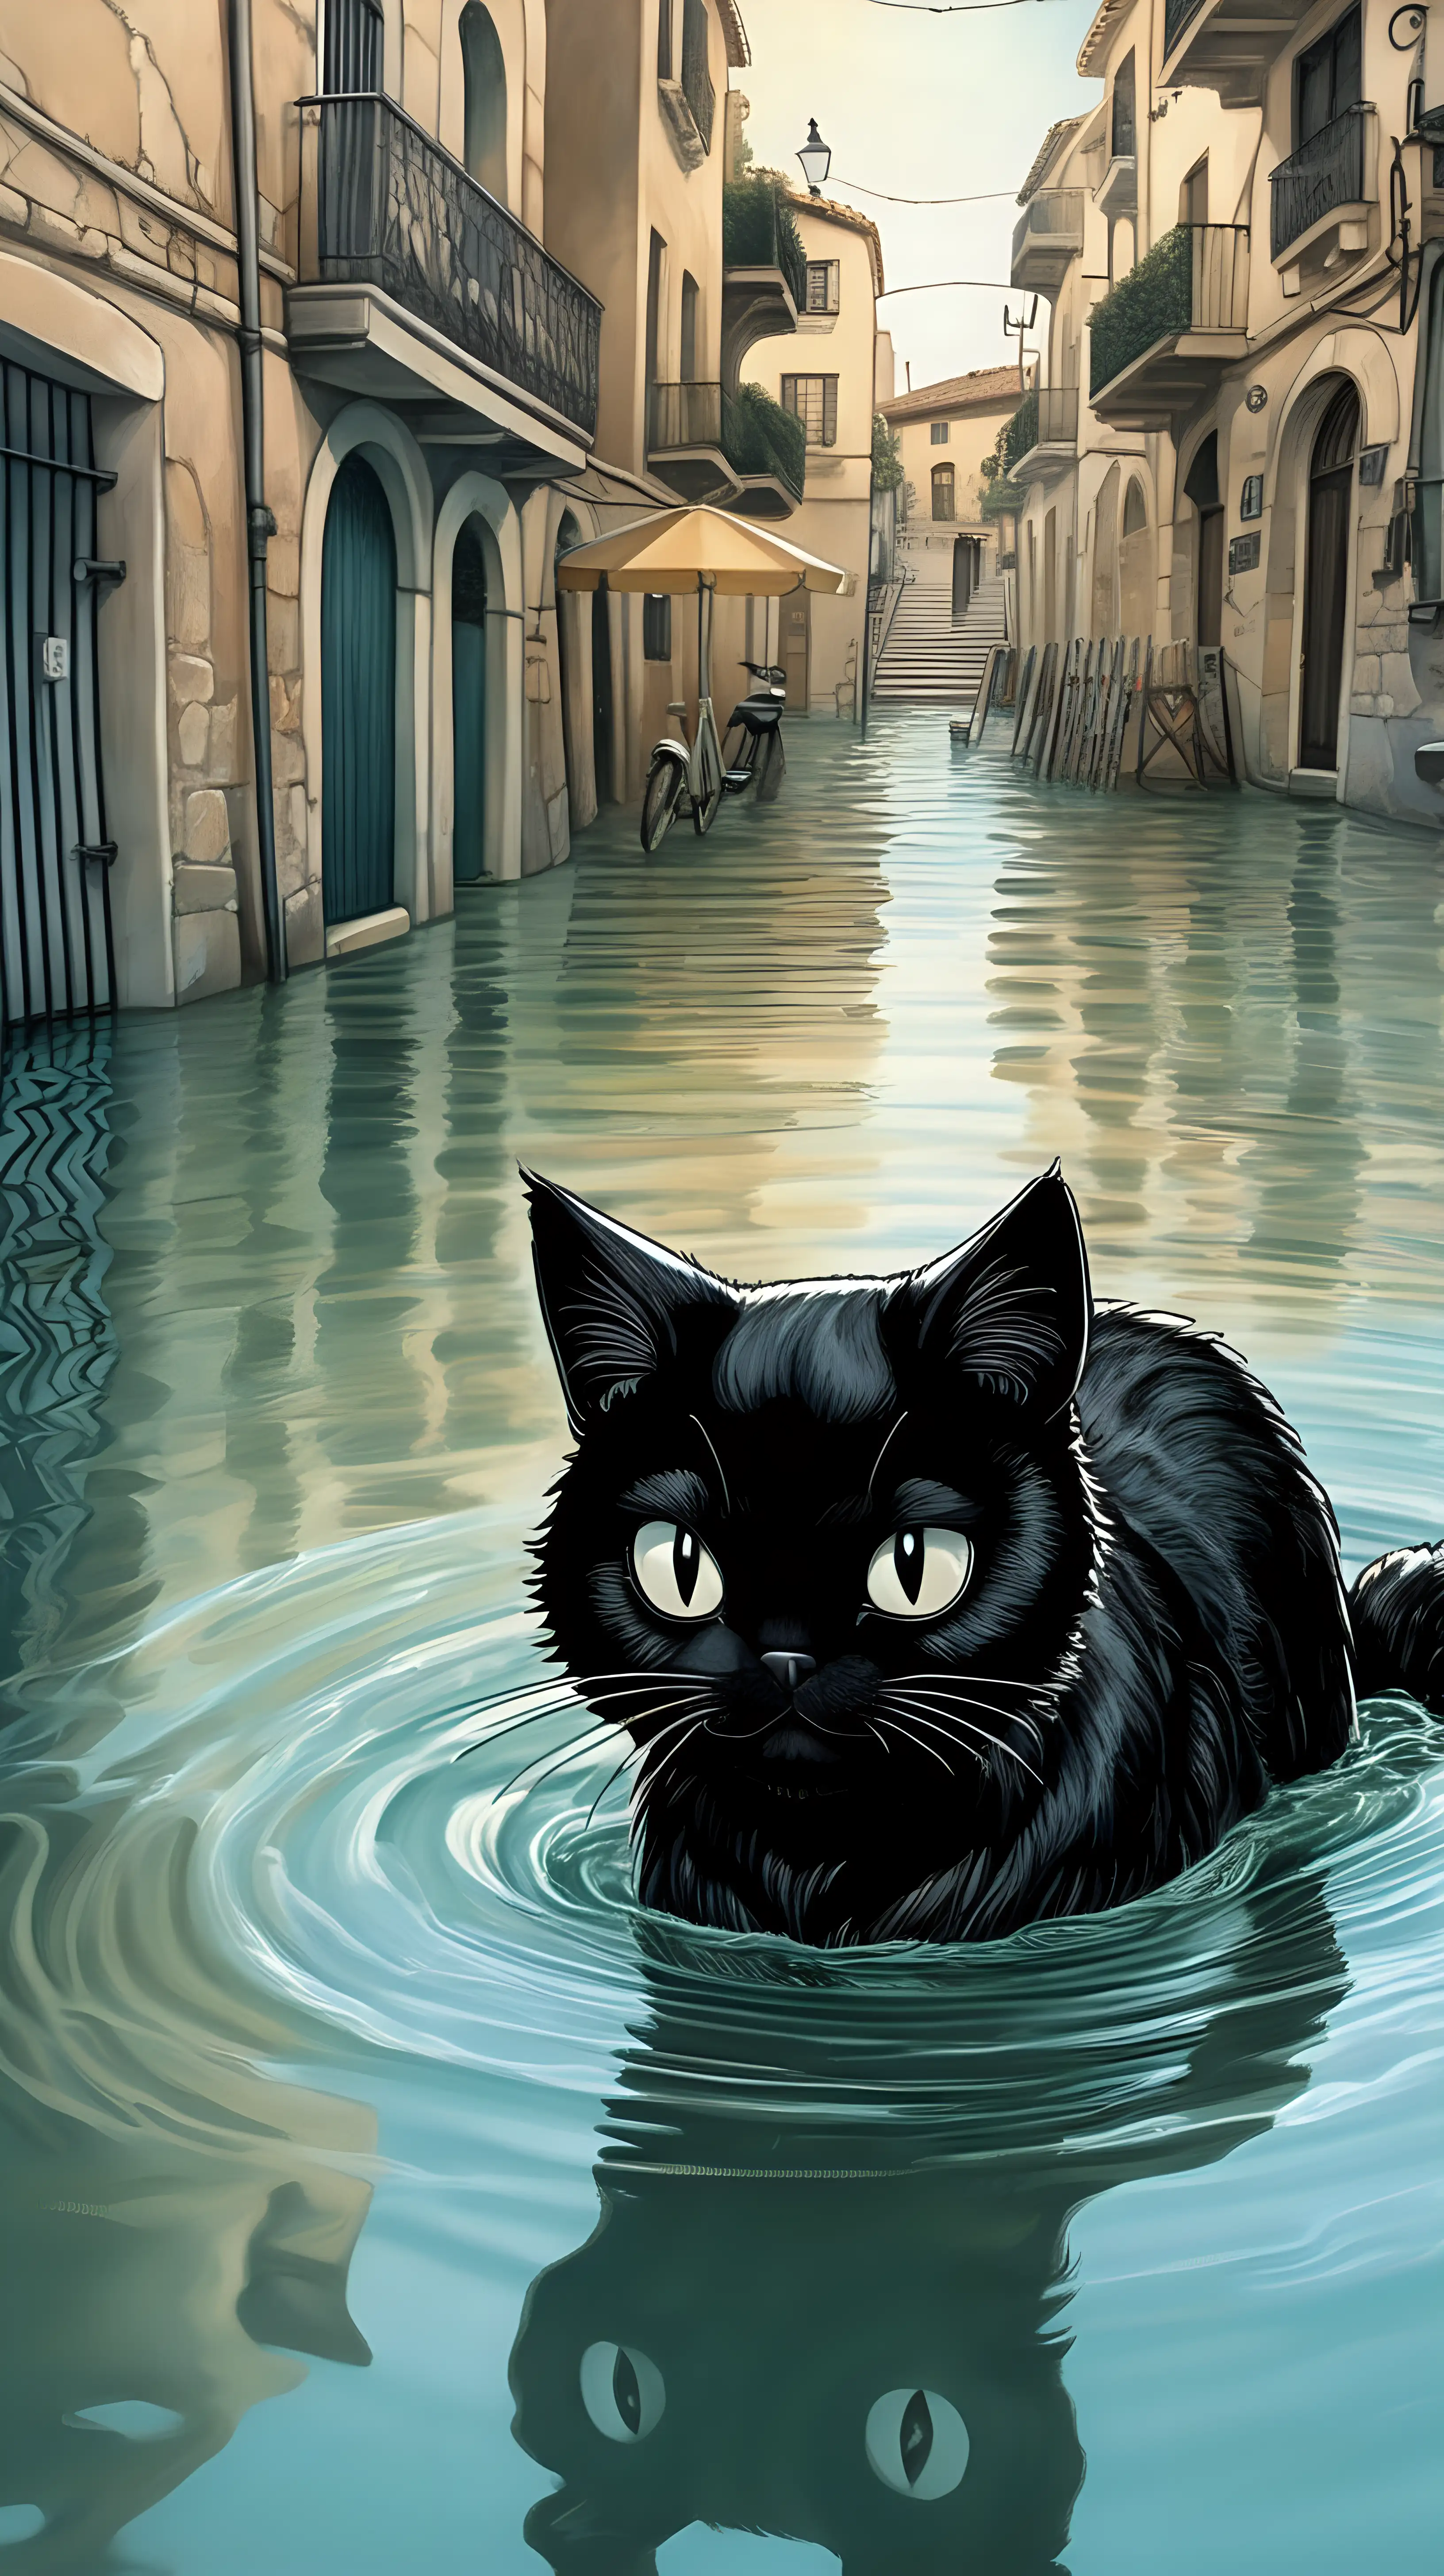 A cat with a sleek, jet-black fur coat. He is swimming in a flooded spanish city. He is trying to survive with only his head over water. Comic book style